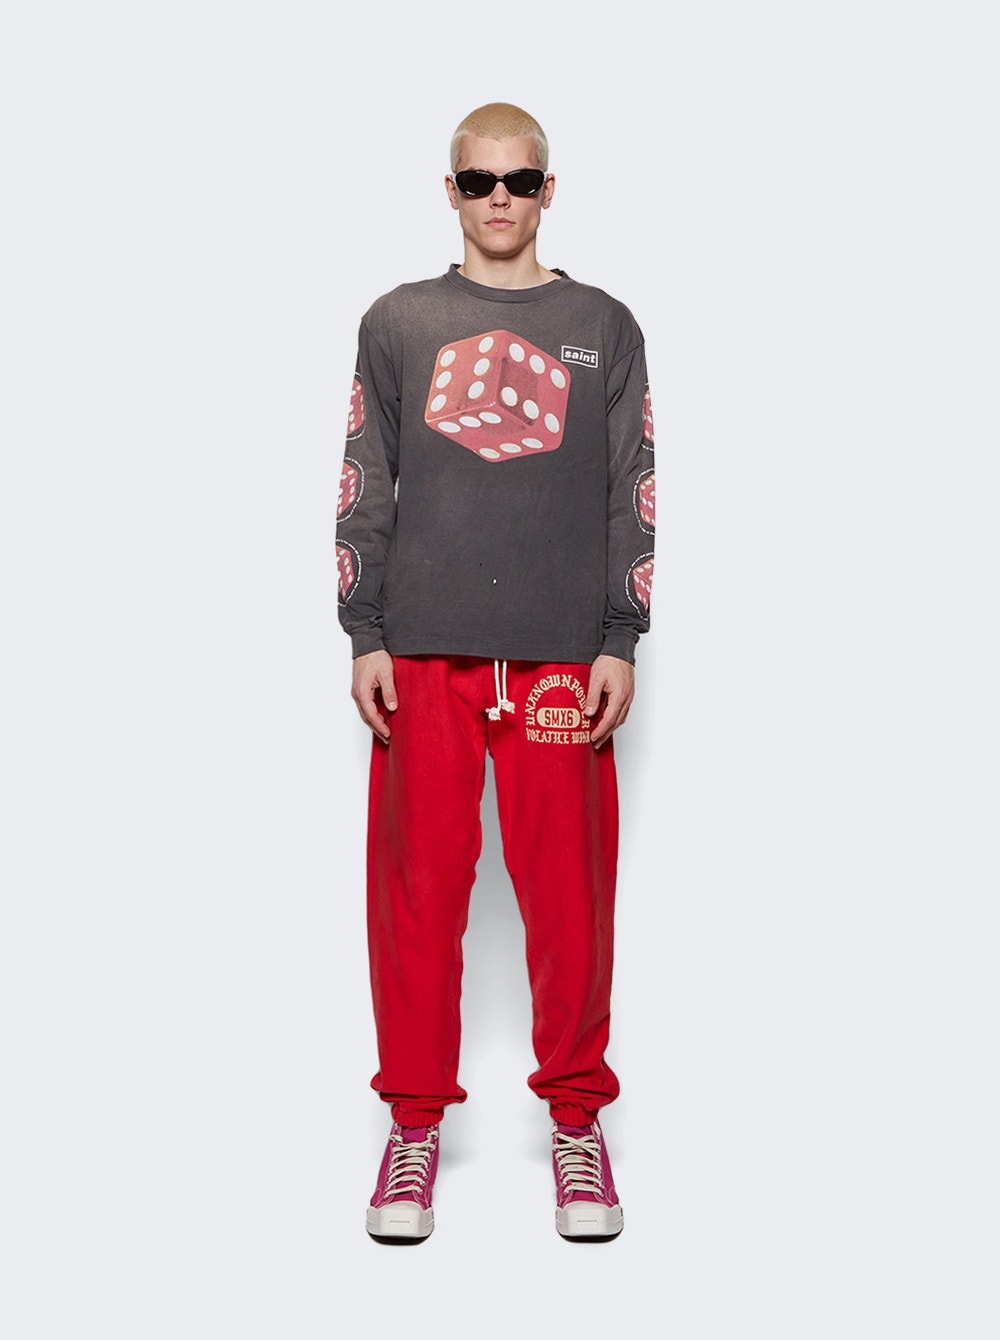 Unknown Power Sweatpants Red - 2